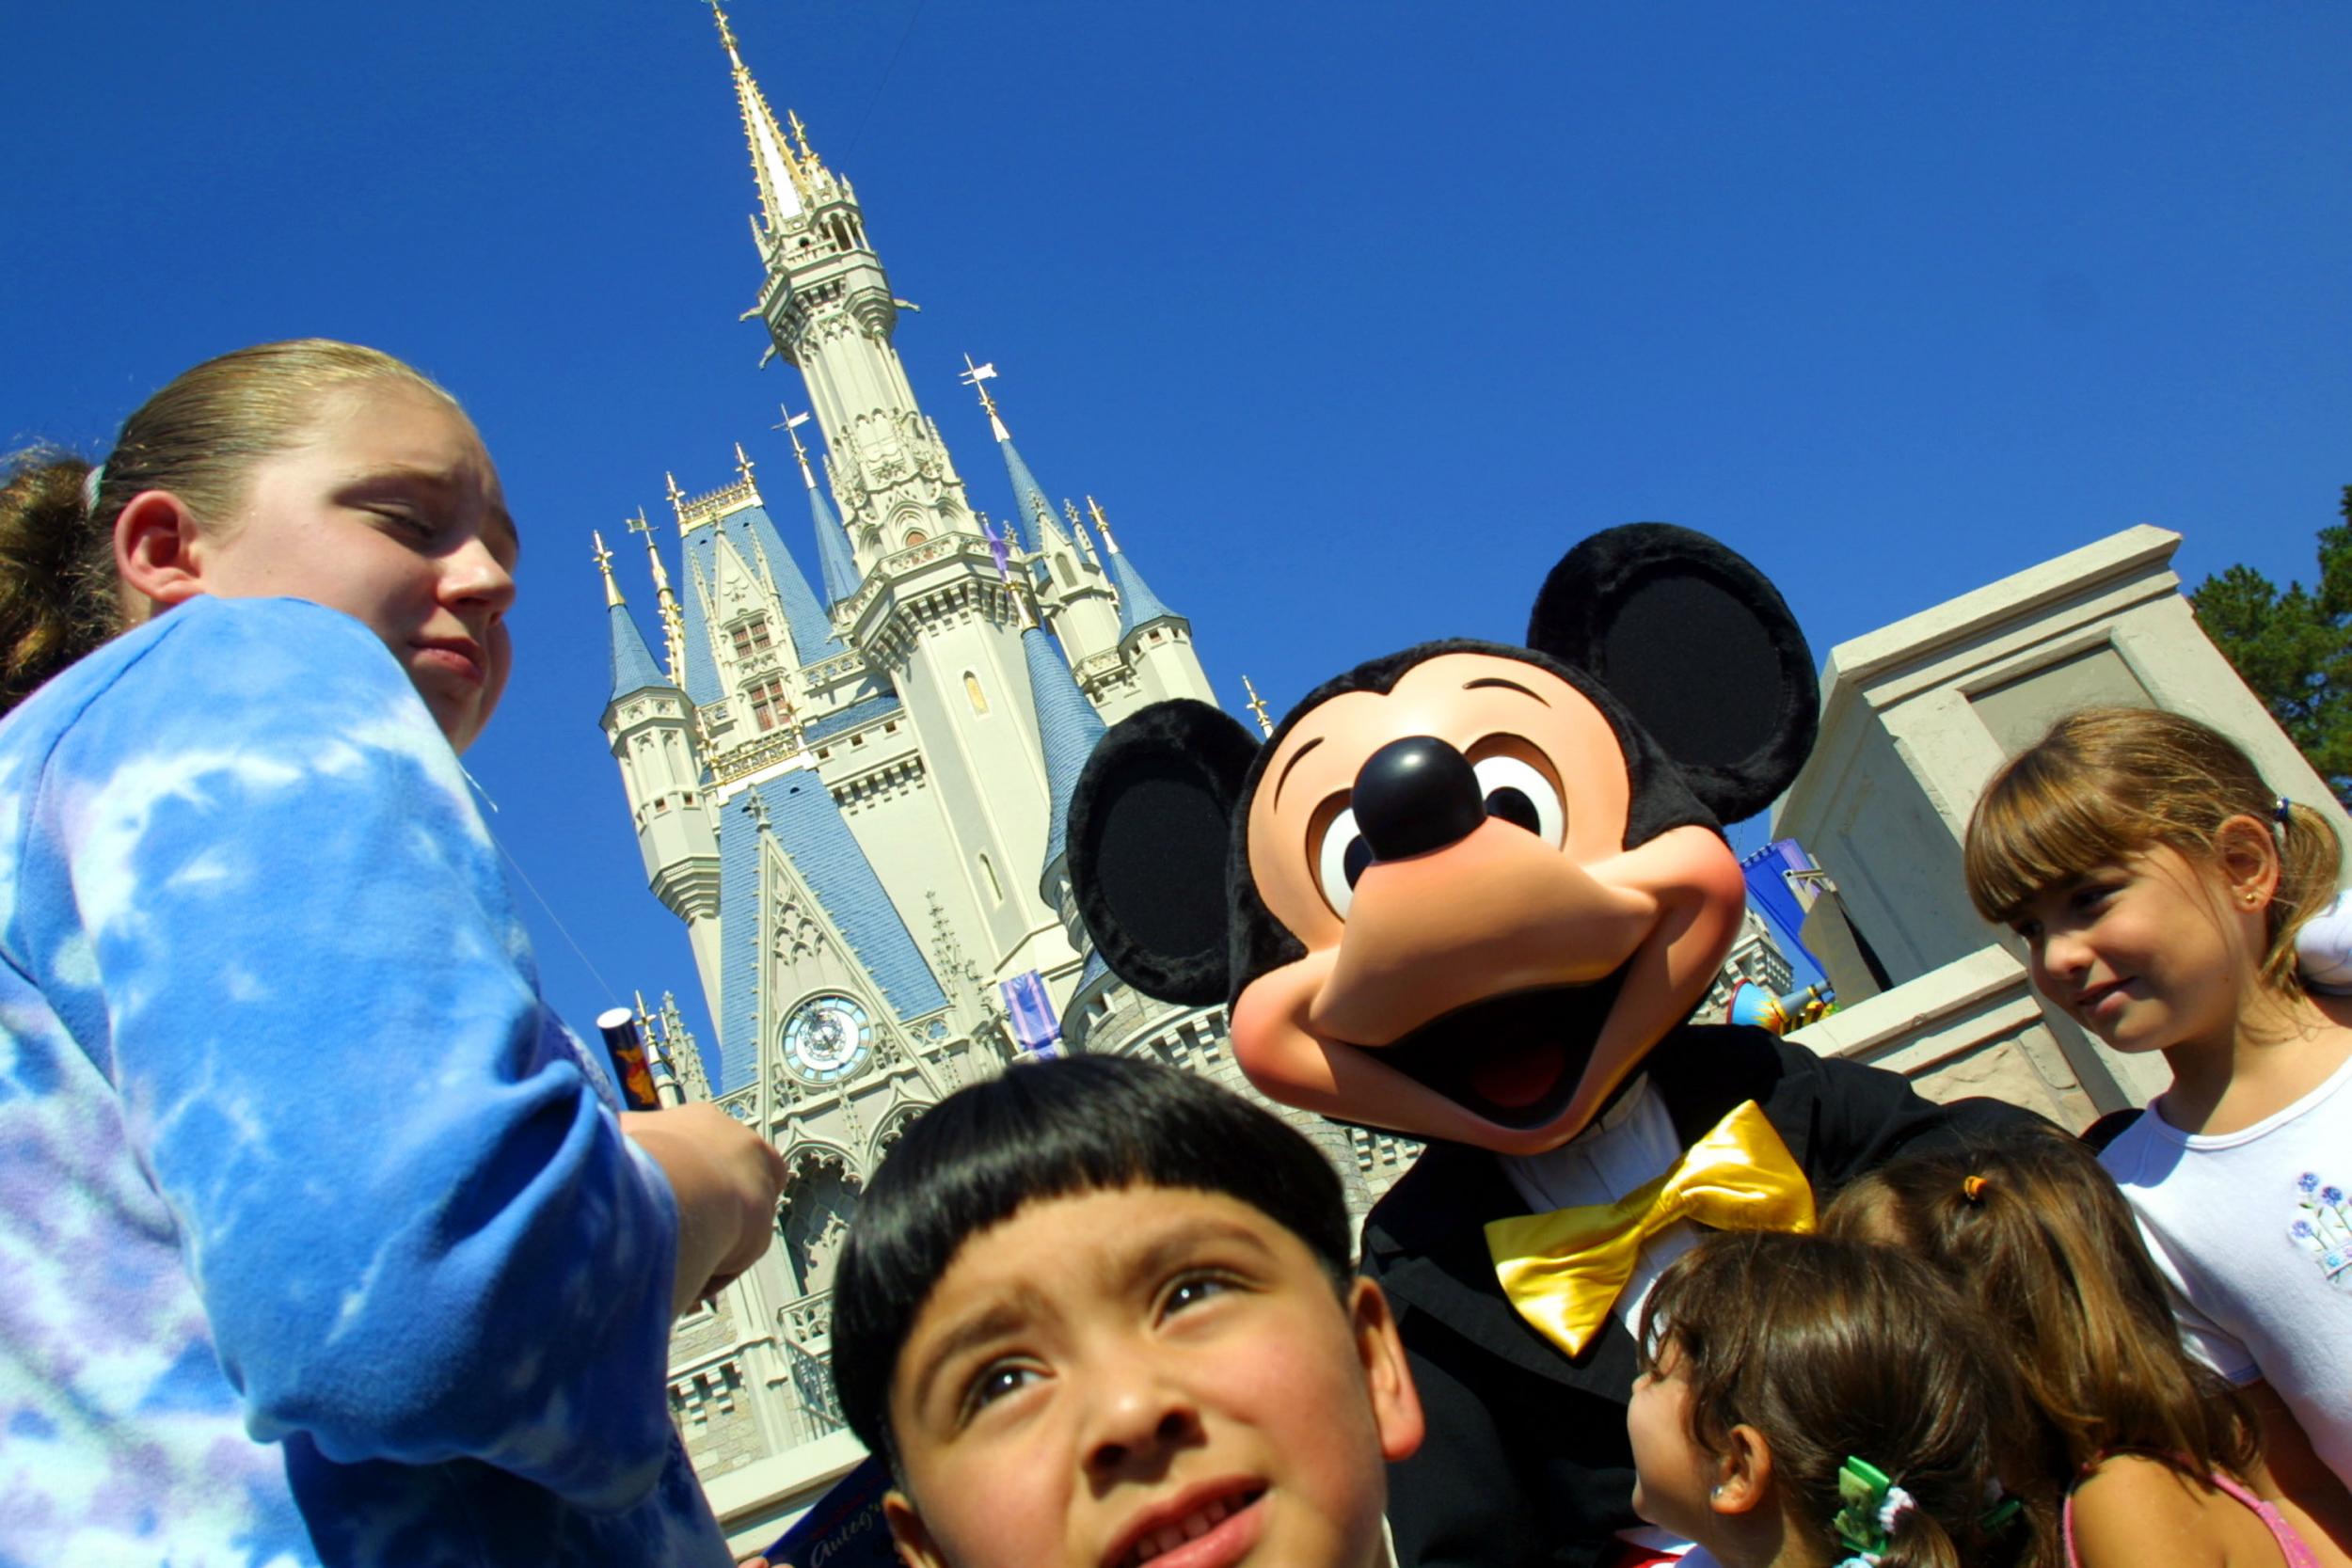 Mickey Mouse hangs with children in Orlando, Florida.